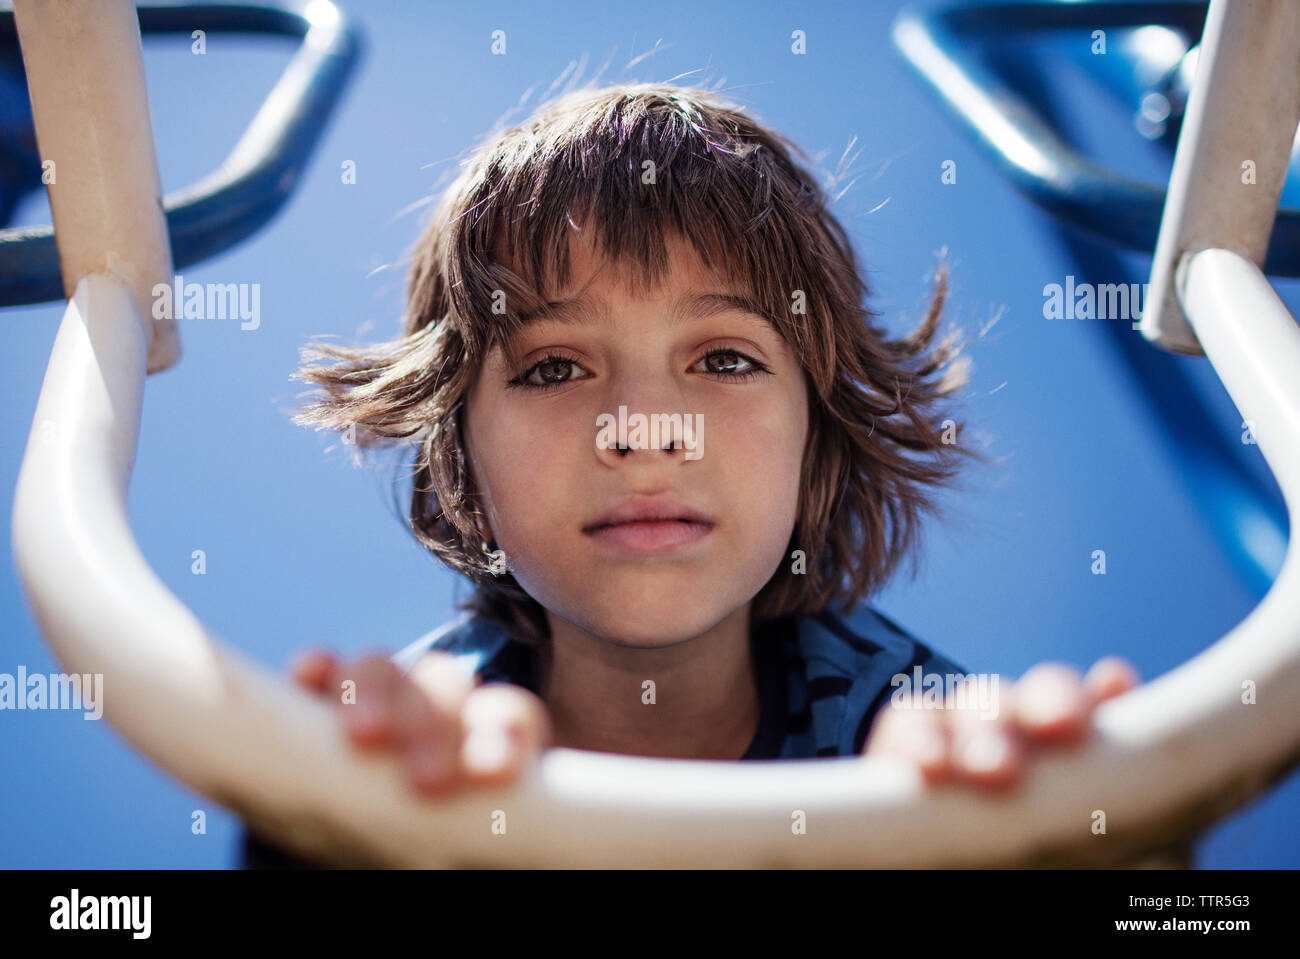 Boy leaning on outdoor play equipment at playground Stock Photo